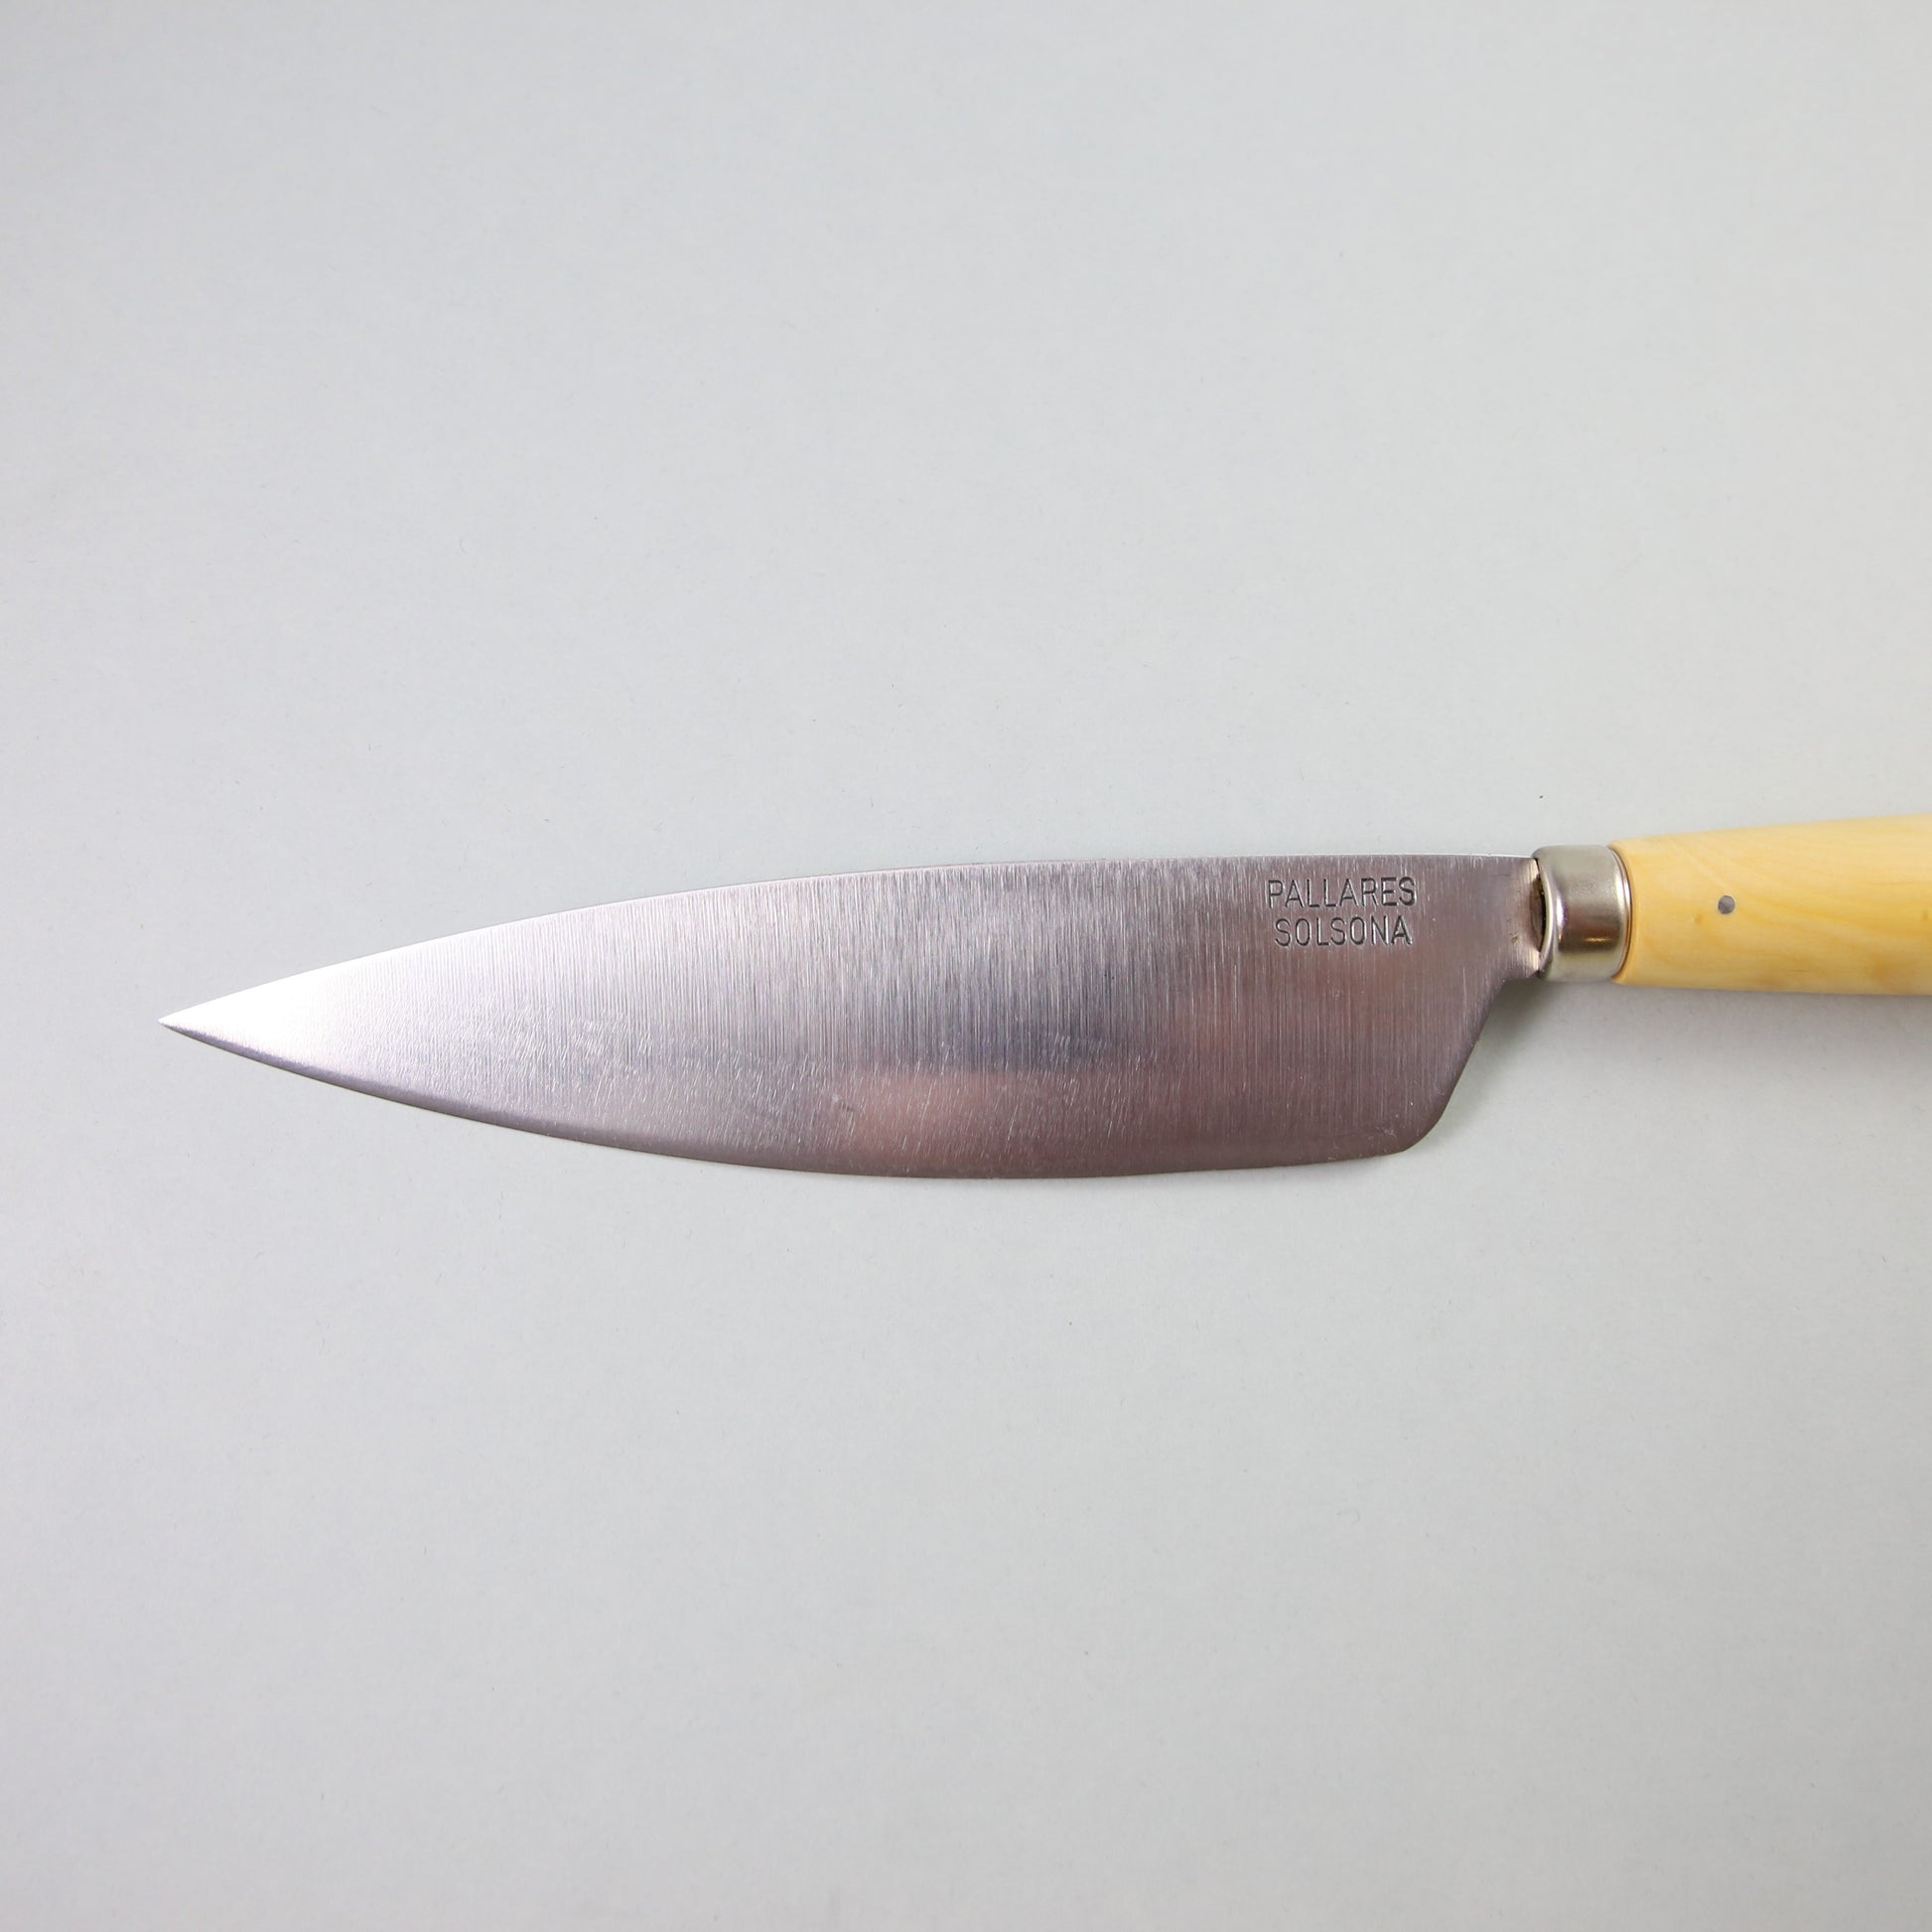 Carbon steel rounded kitchen knife 16cm with boxwood handle